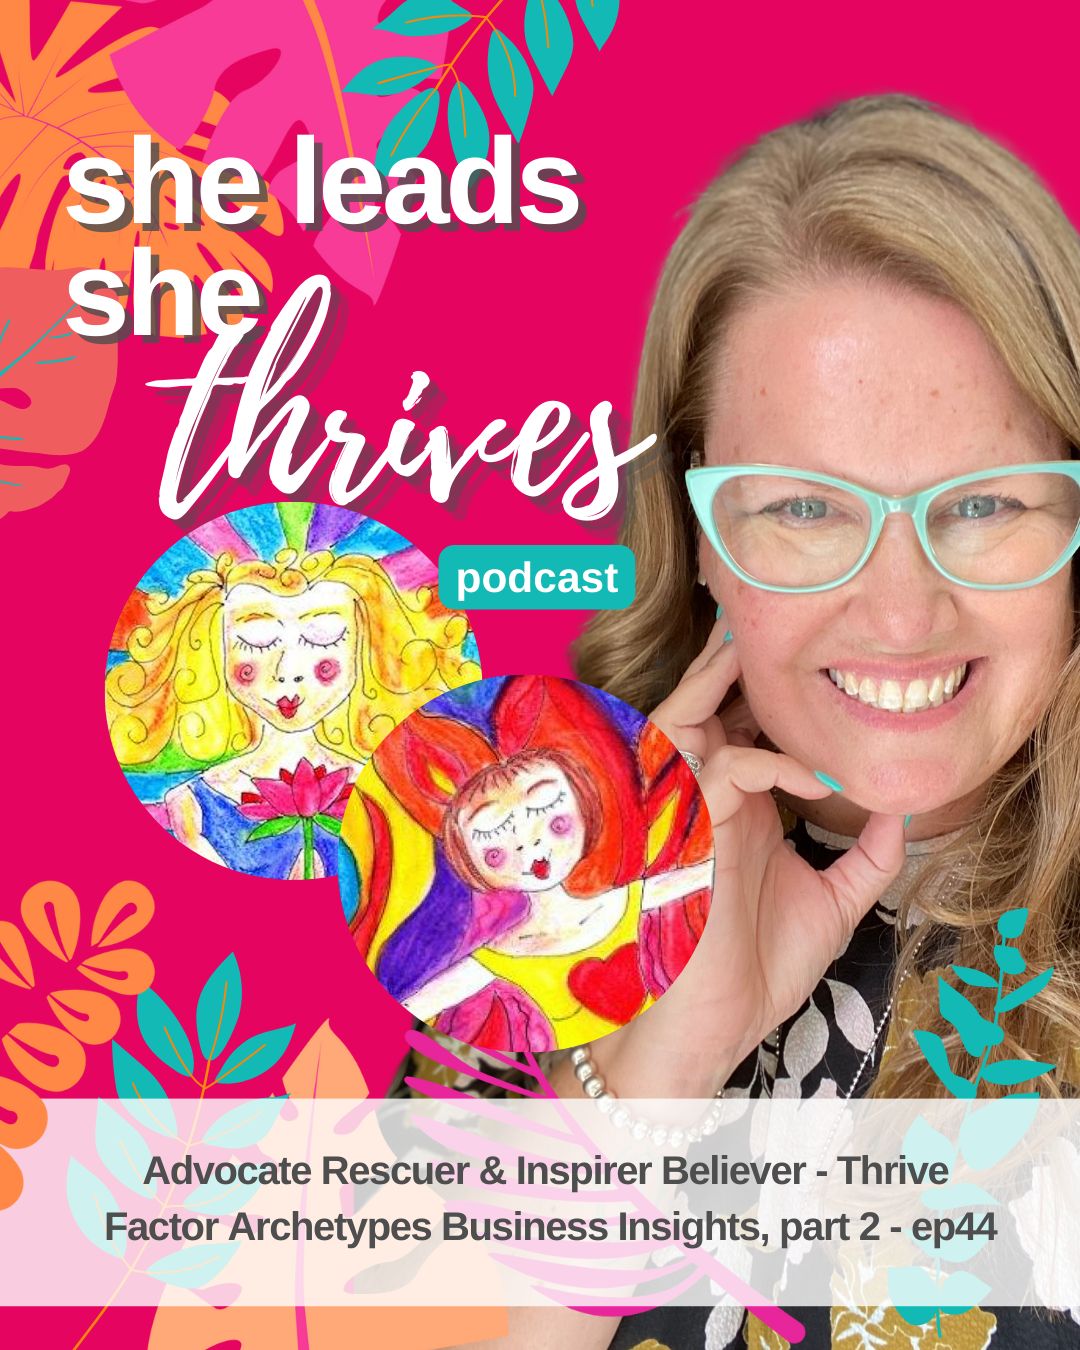 Thrive Factor Archetypes Business Insights_Advocate Rescuer_Inspirer Believer_She Leads She Thrives Podcast Episode 44_